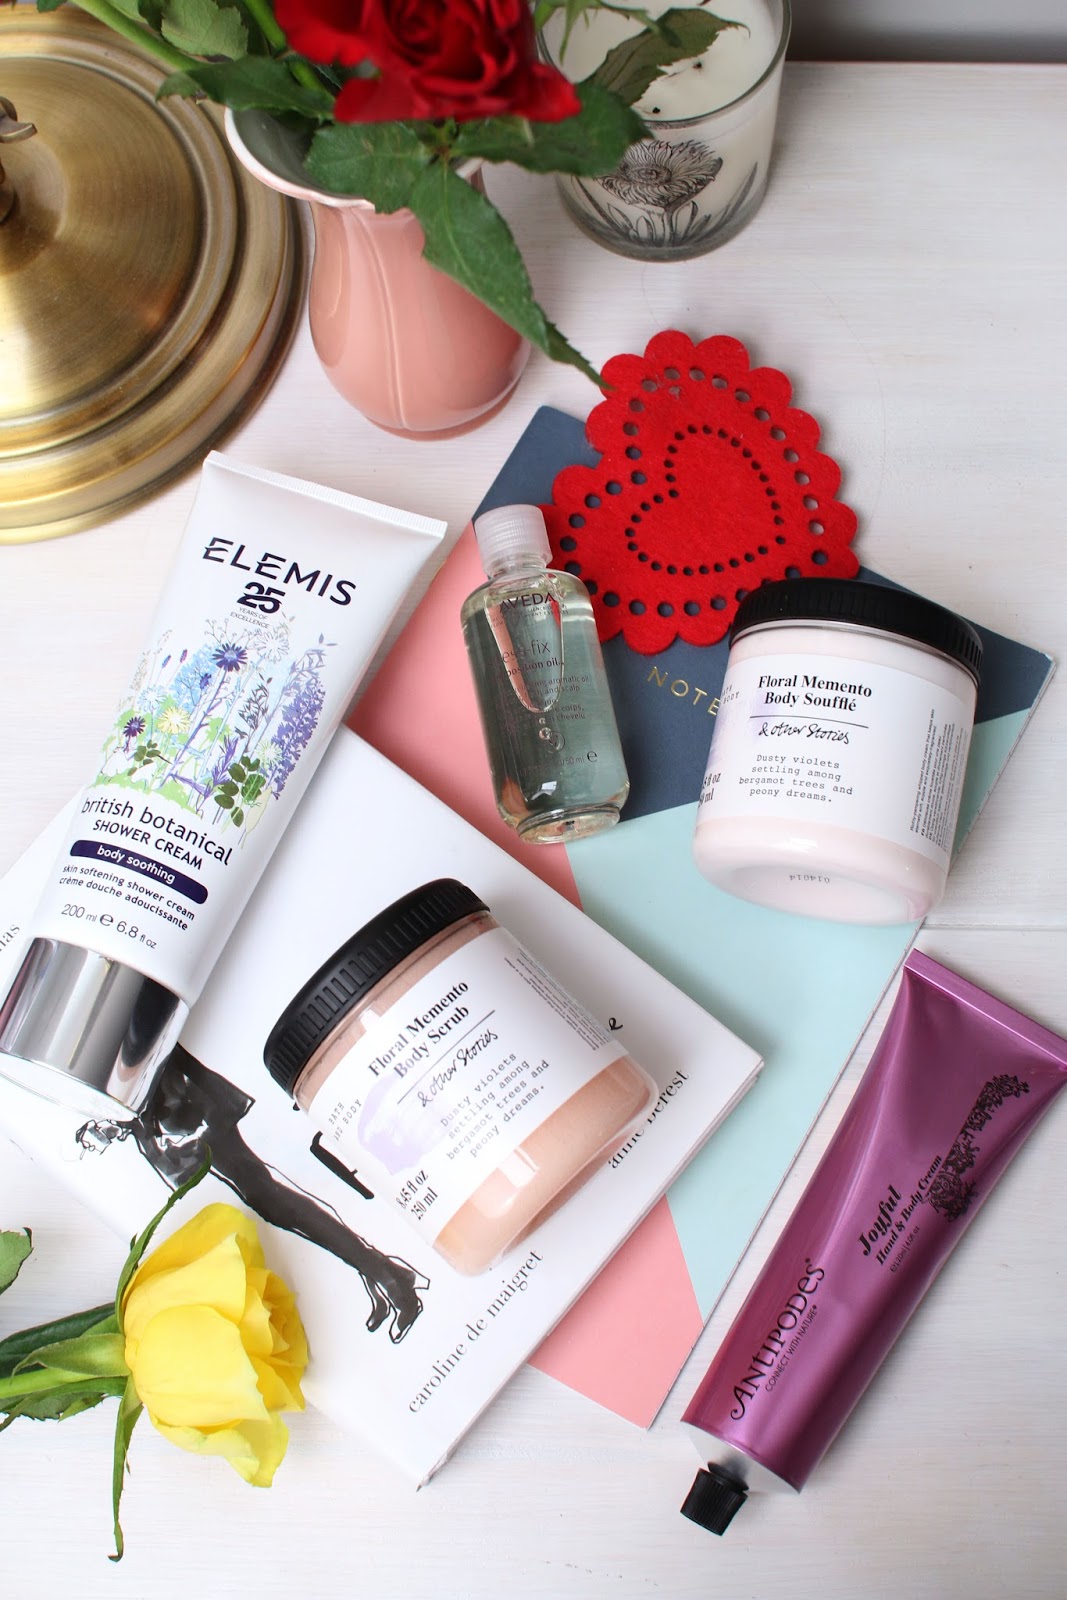 Much Needed Body TLC with Antipodes Joyful Hand Cream, & Other Stories Floral Memento Body Scrub, Floral Memento Body Souffle, Elemis British Botanical Shower Cream and Aveda Stress Fix Oil